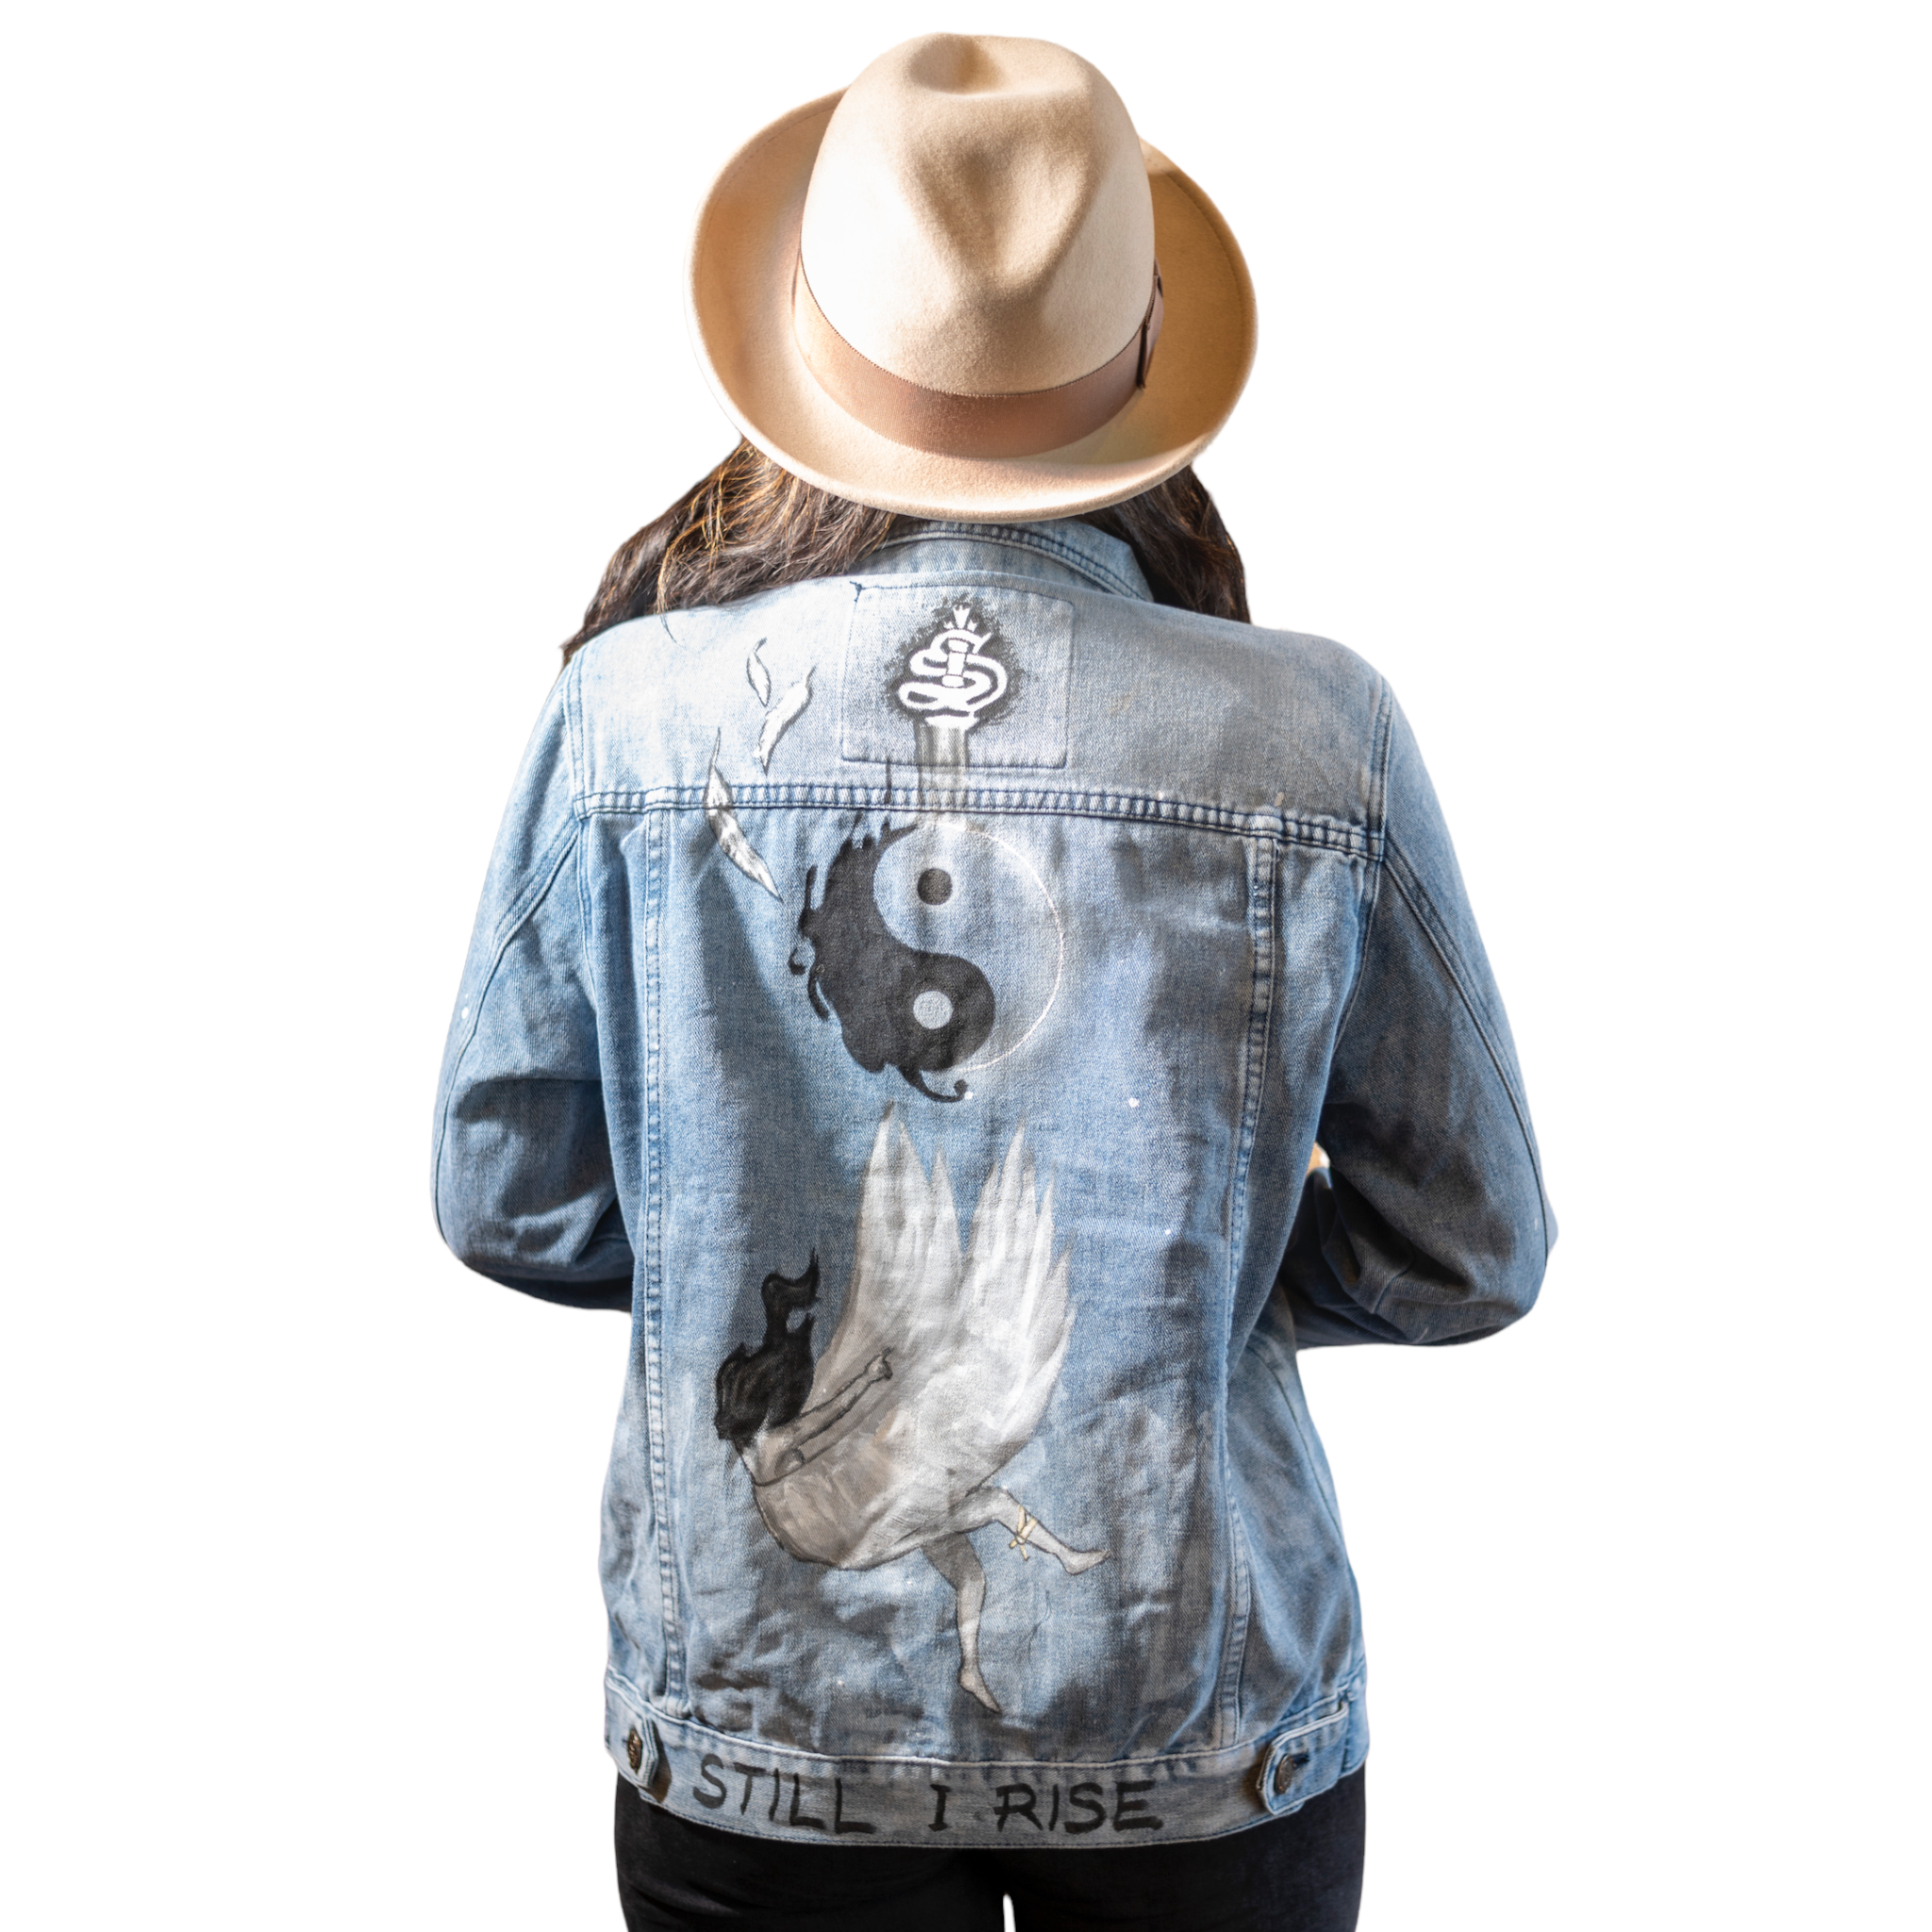 Custom Print on a Denim Jacket with DTF Cold Peel - YouTube